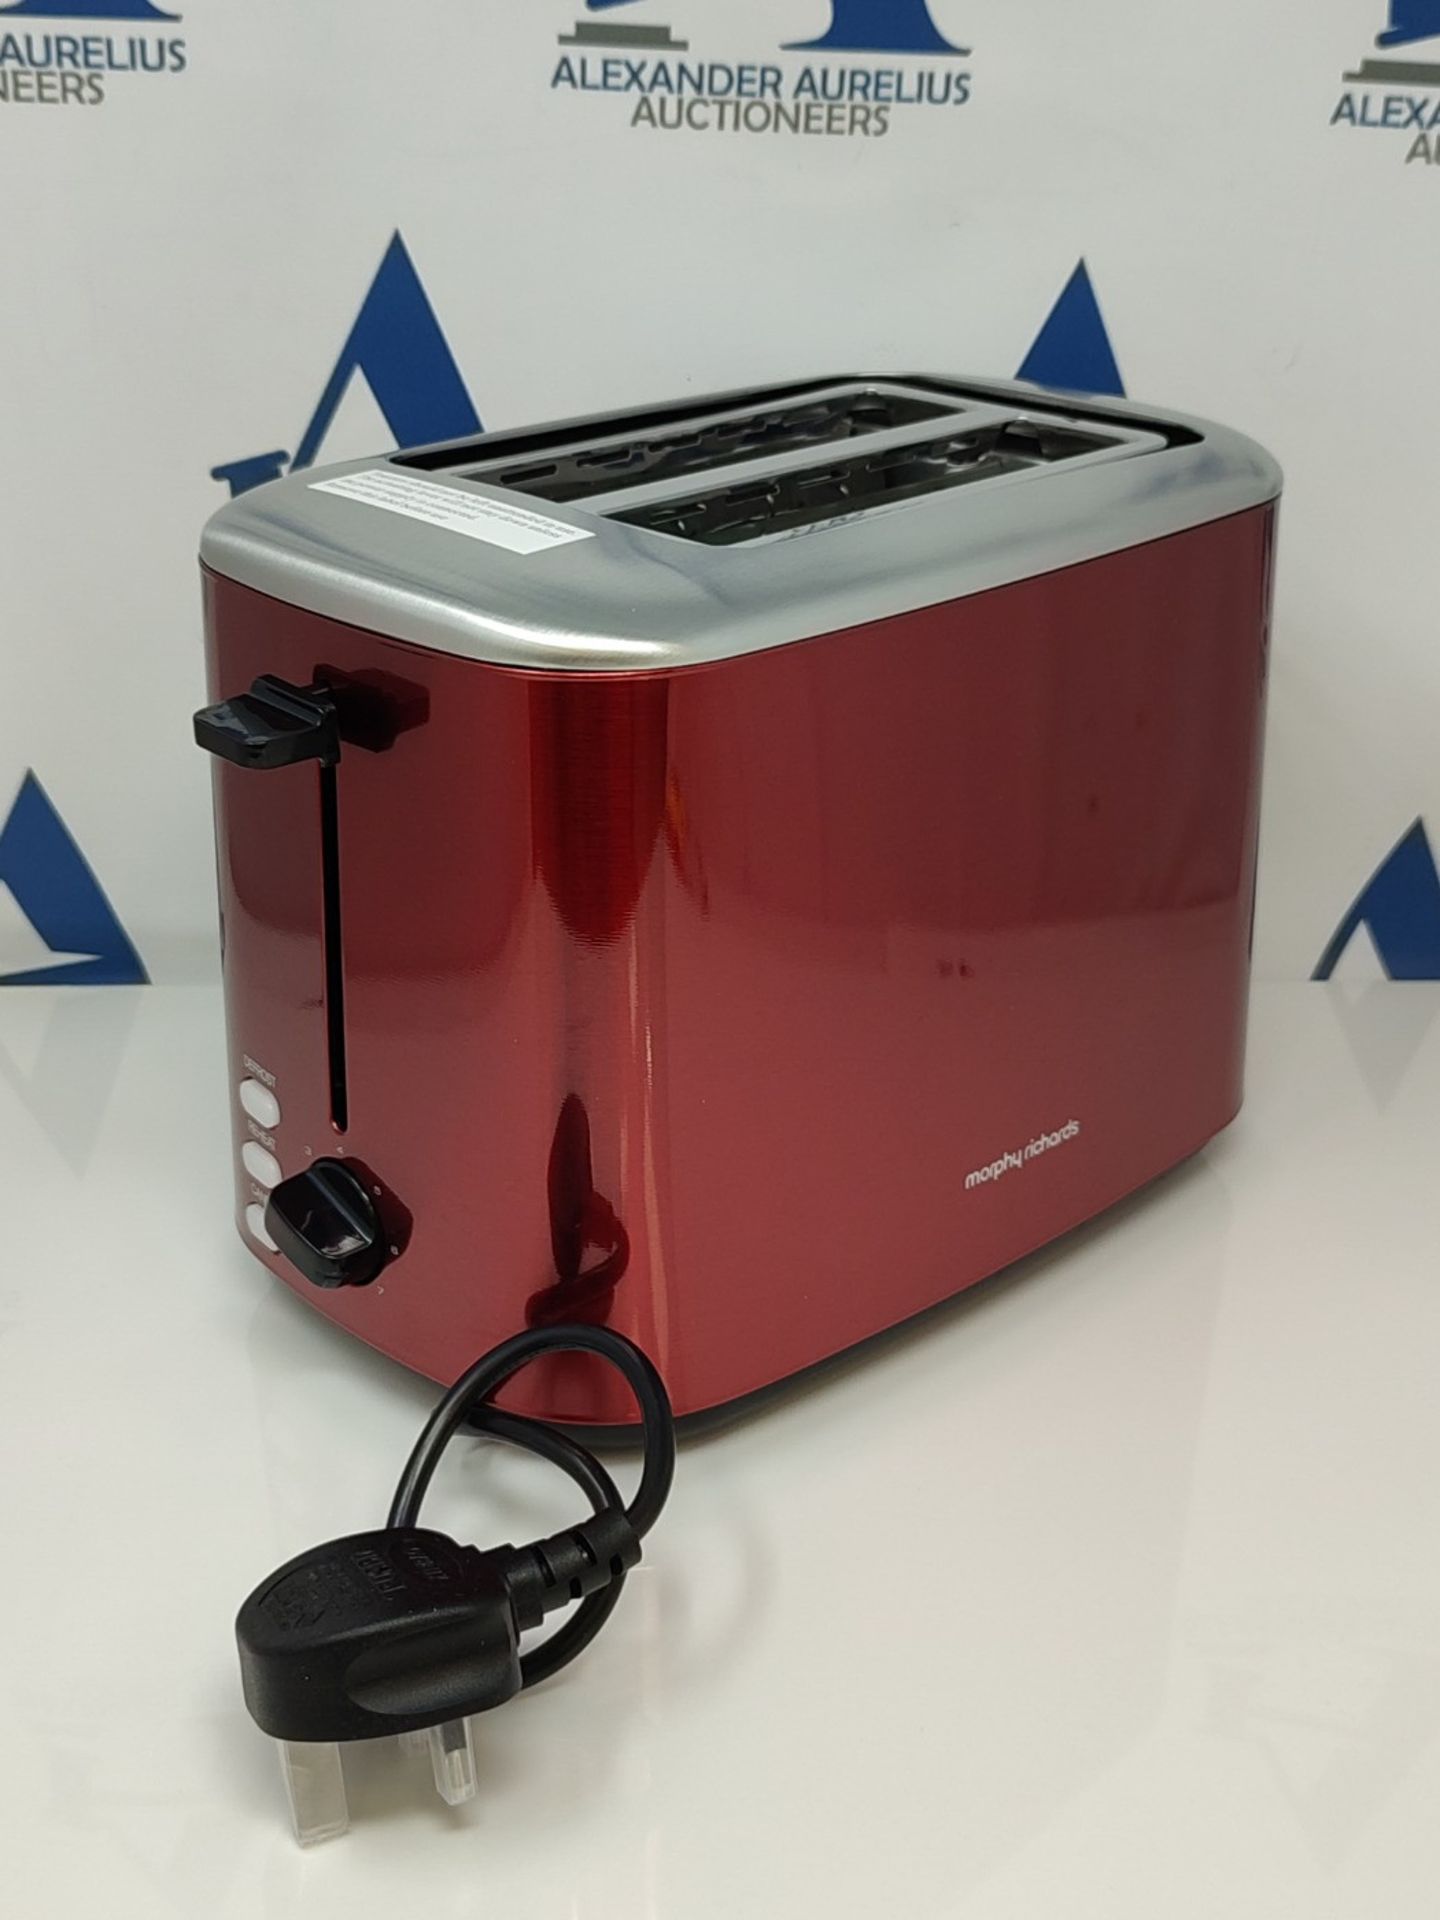 Morphy Richards Equip Red 2 Slice Toaster - Defrost And Reheat Settings - 2 Slot - Sta - Image 3 of 3